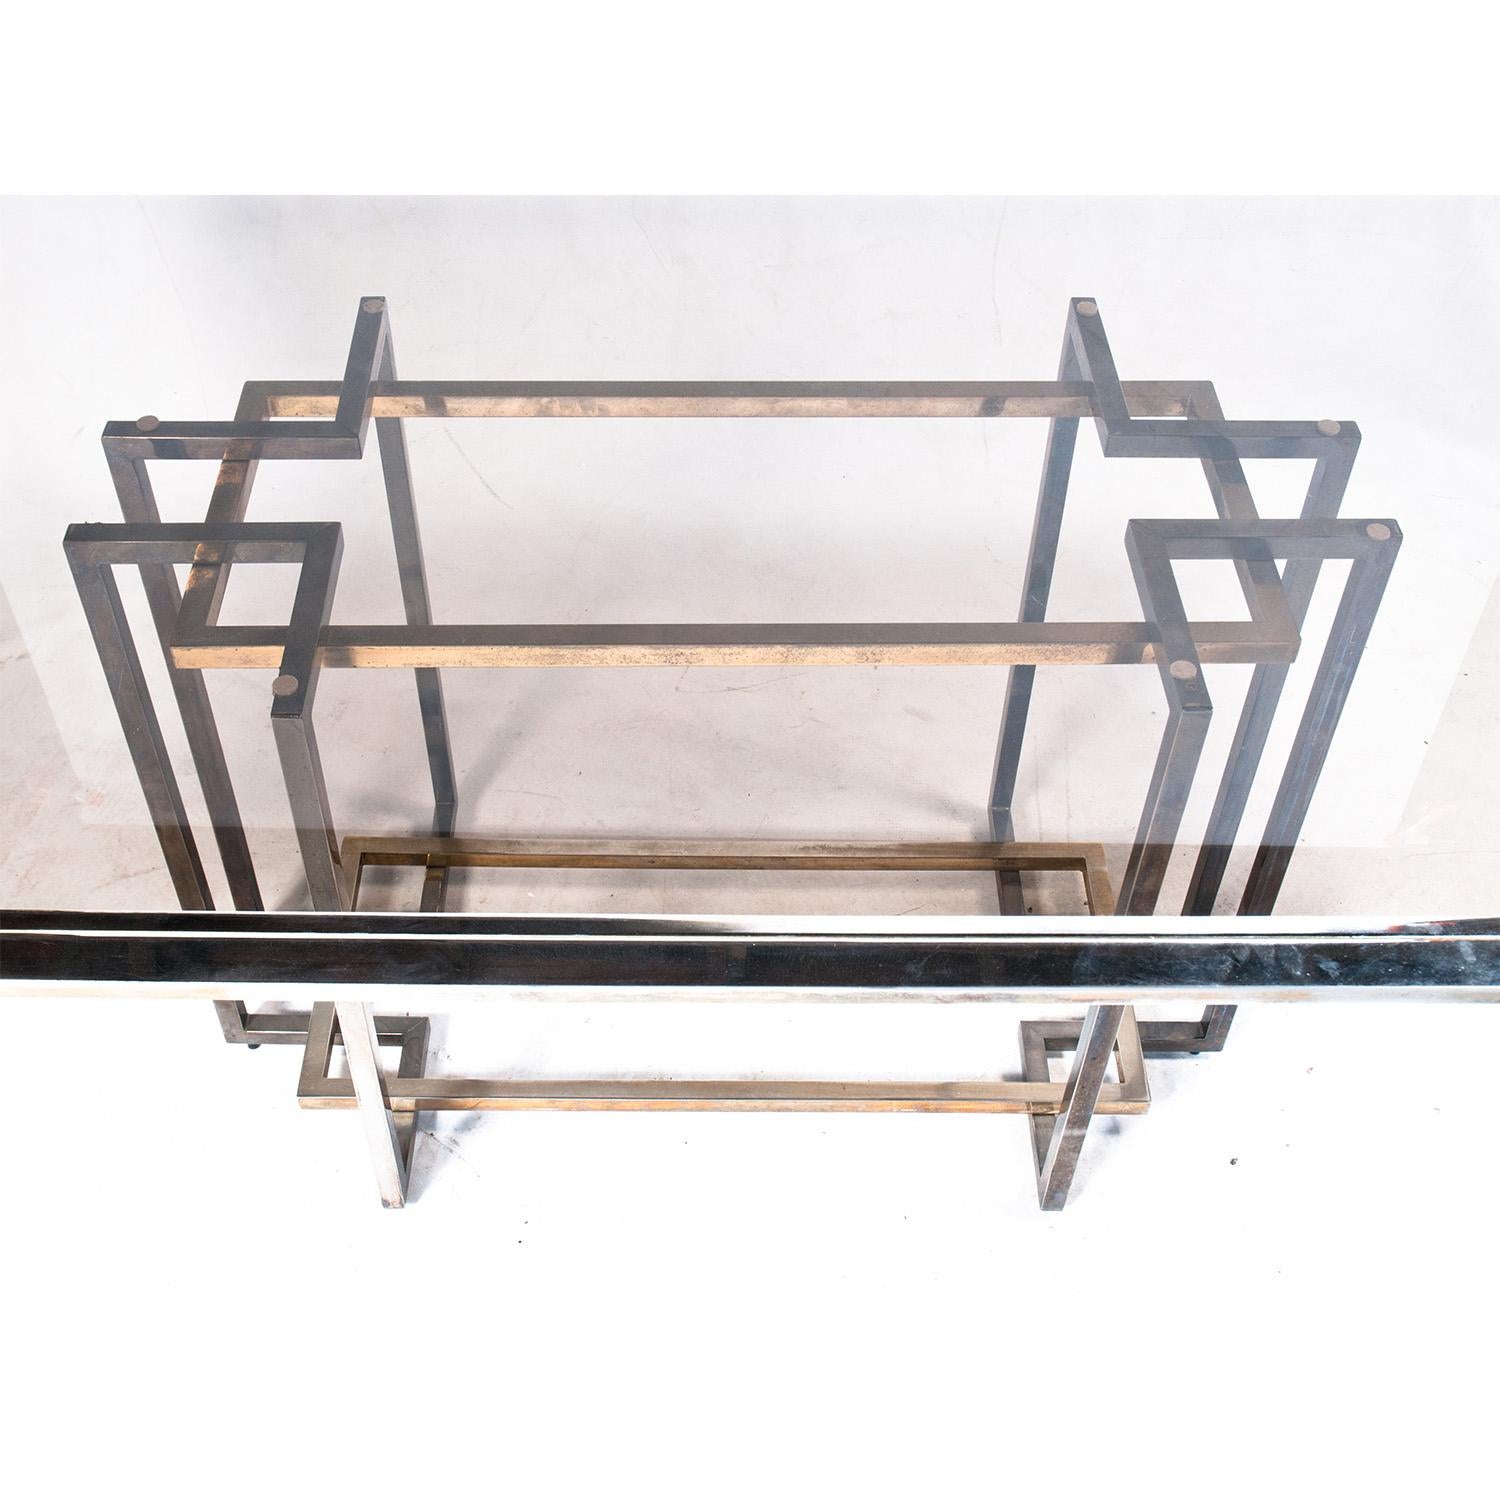 Italian modern brass and smoked glass dining table.